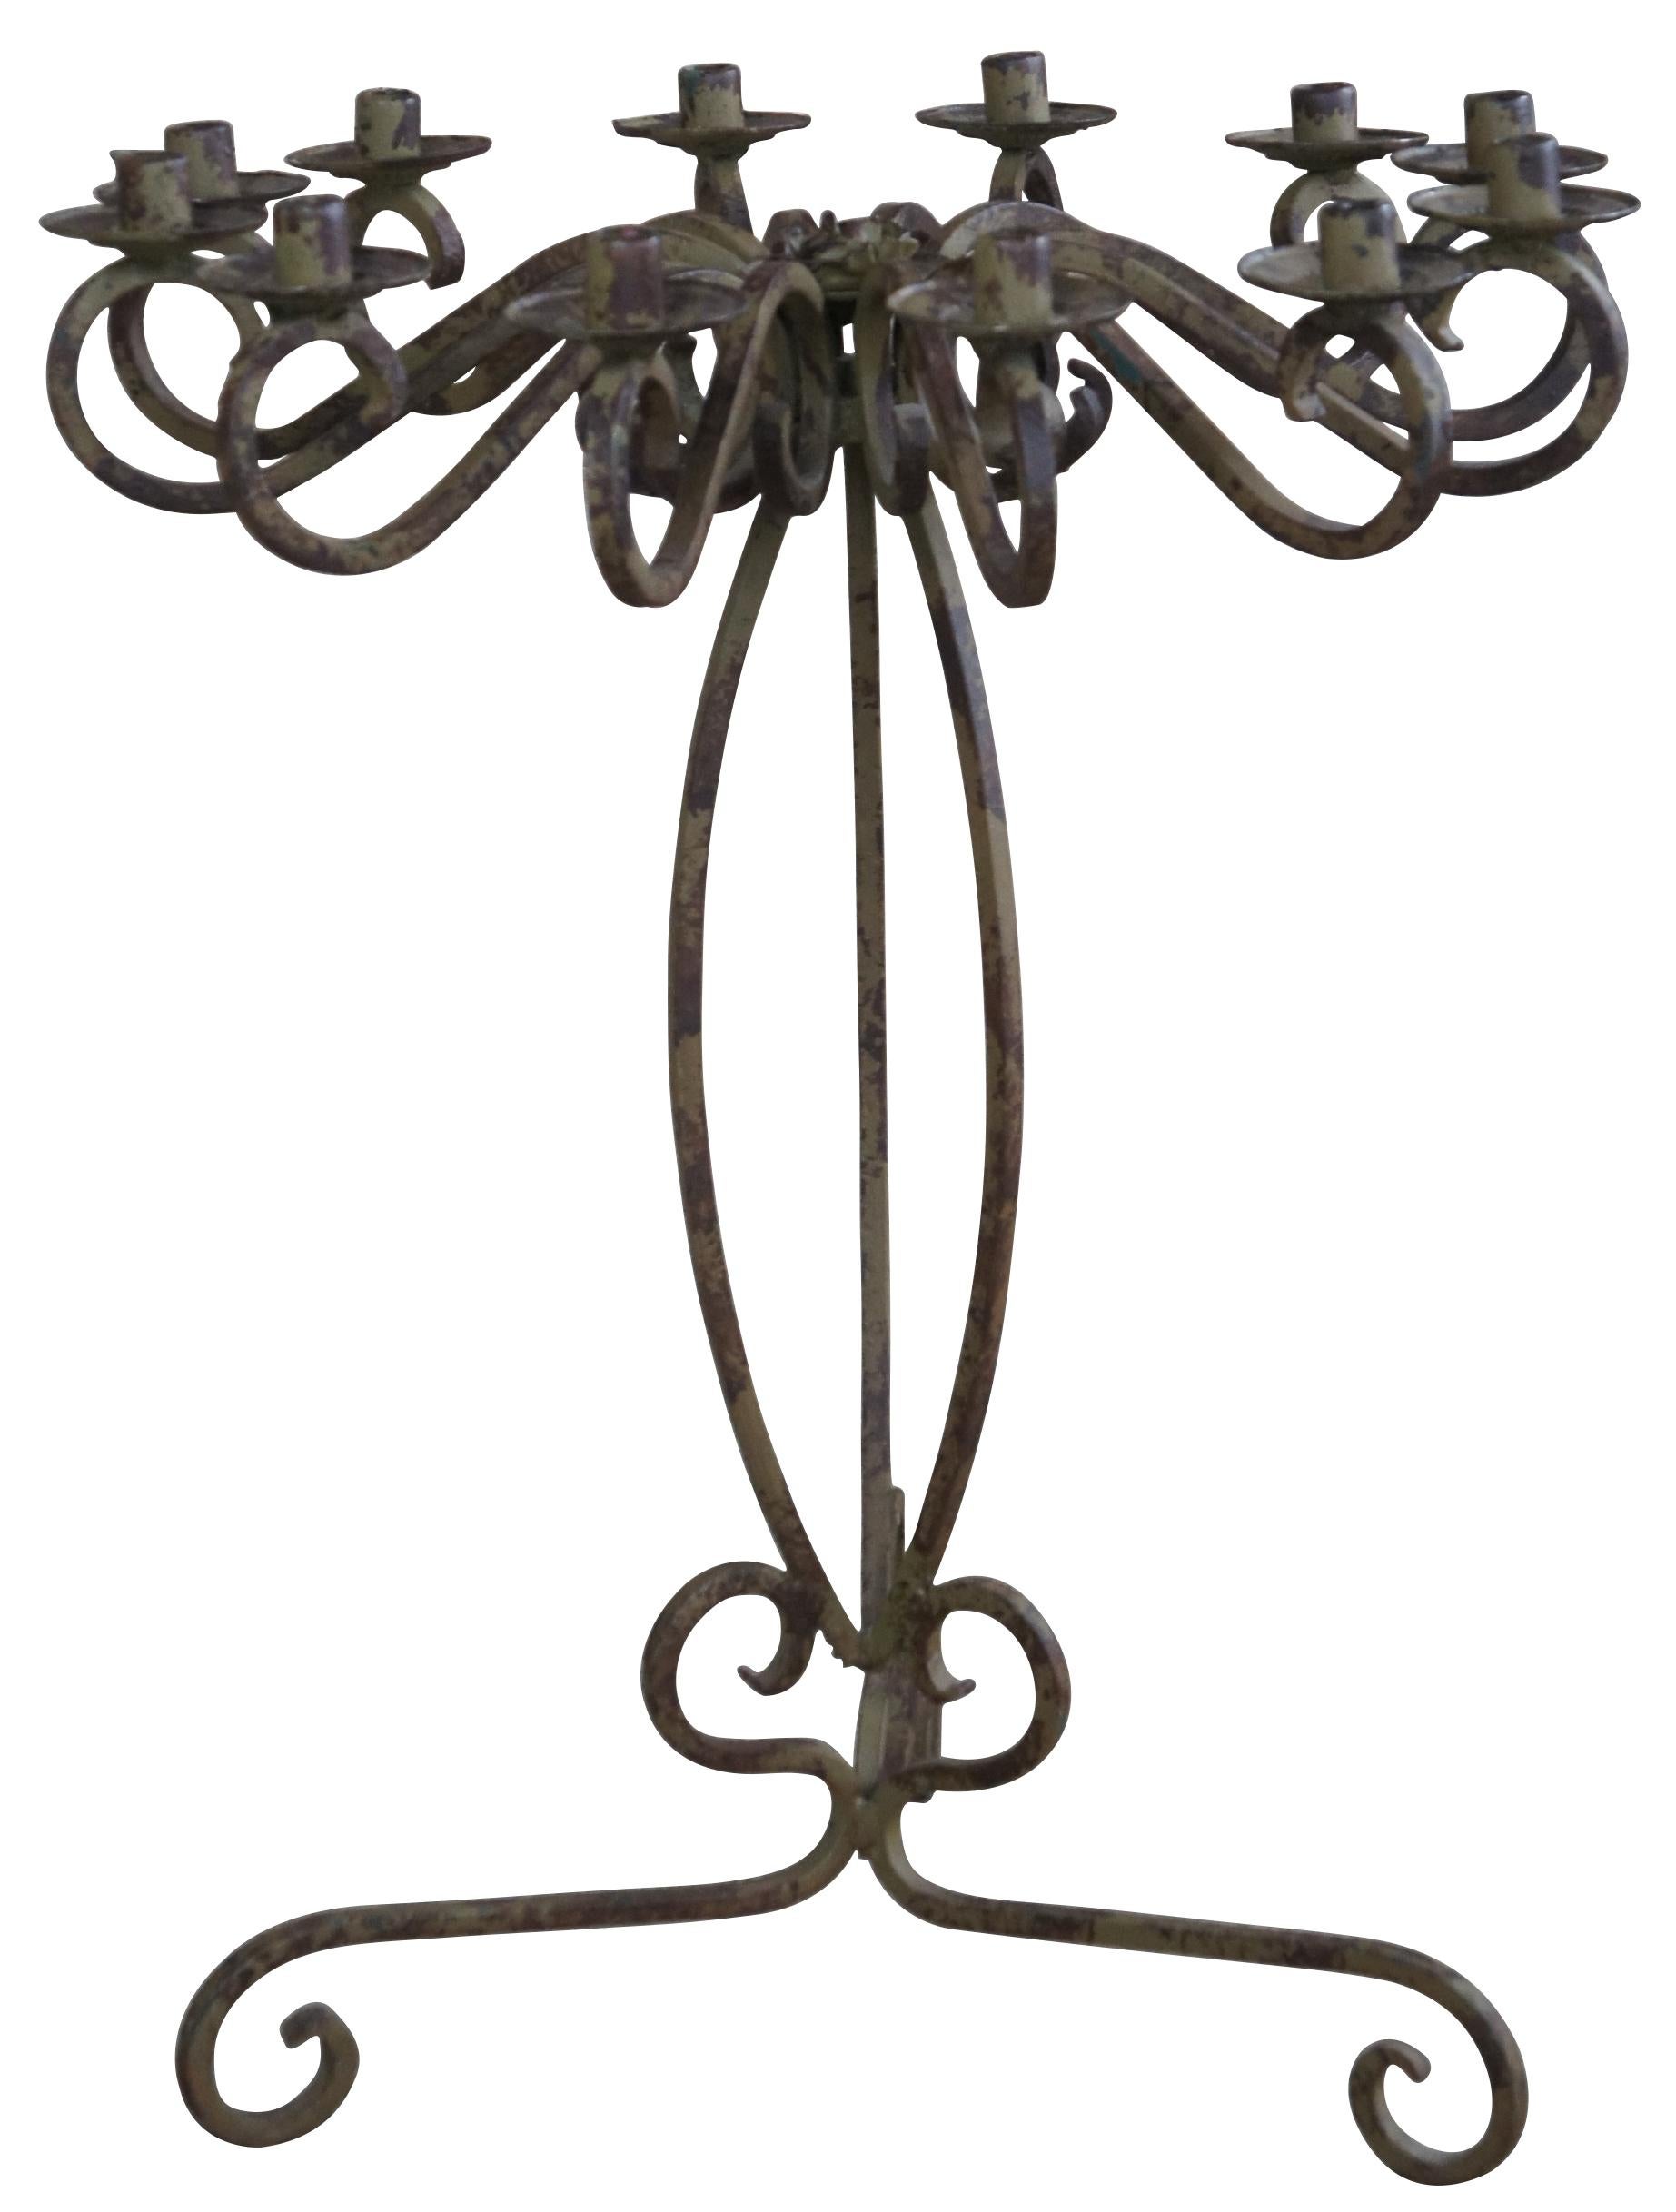 20th Century French or Gothic inspired 12 light candelabra. Features a scrolled design with pedestal and molded flower at the center. Each candle holder features a drip pan. The candelabra is finished in a rustic green patina and painted in a